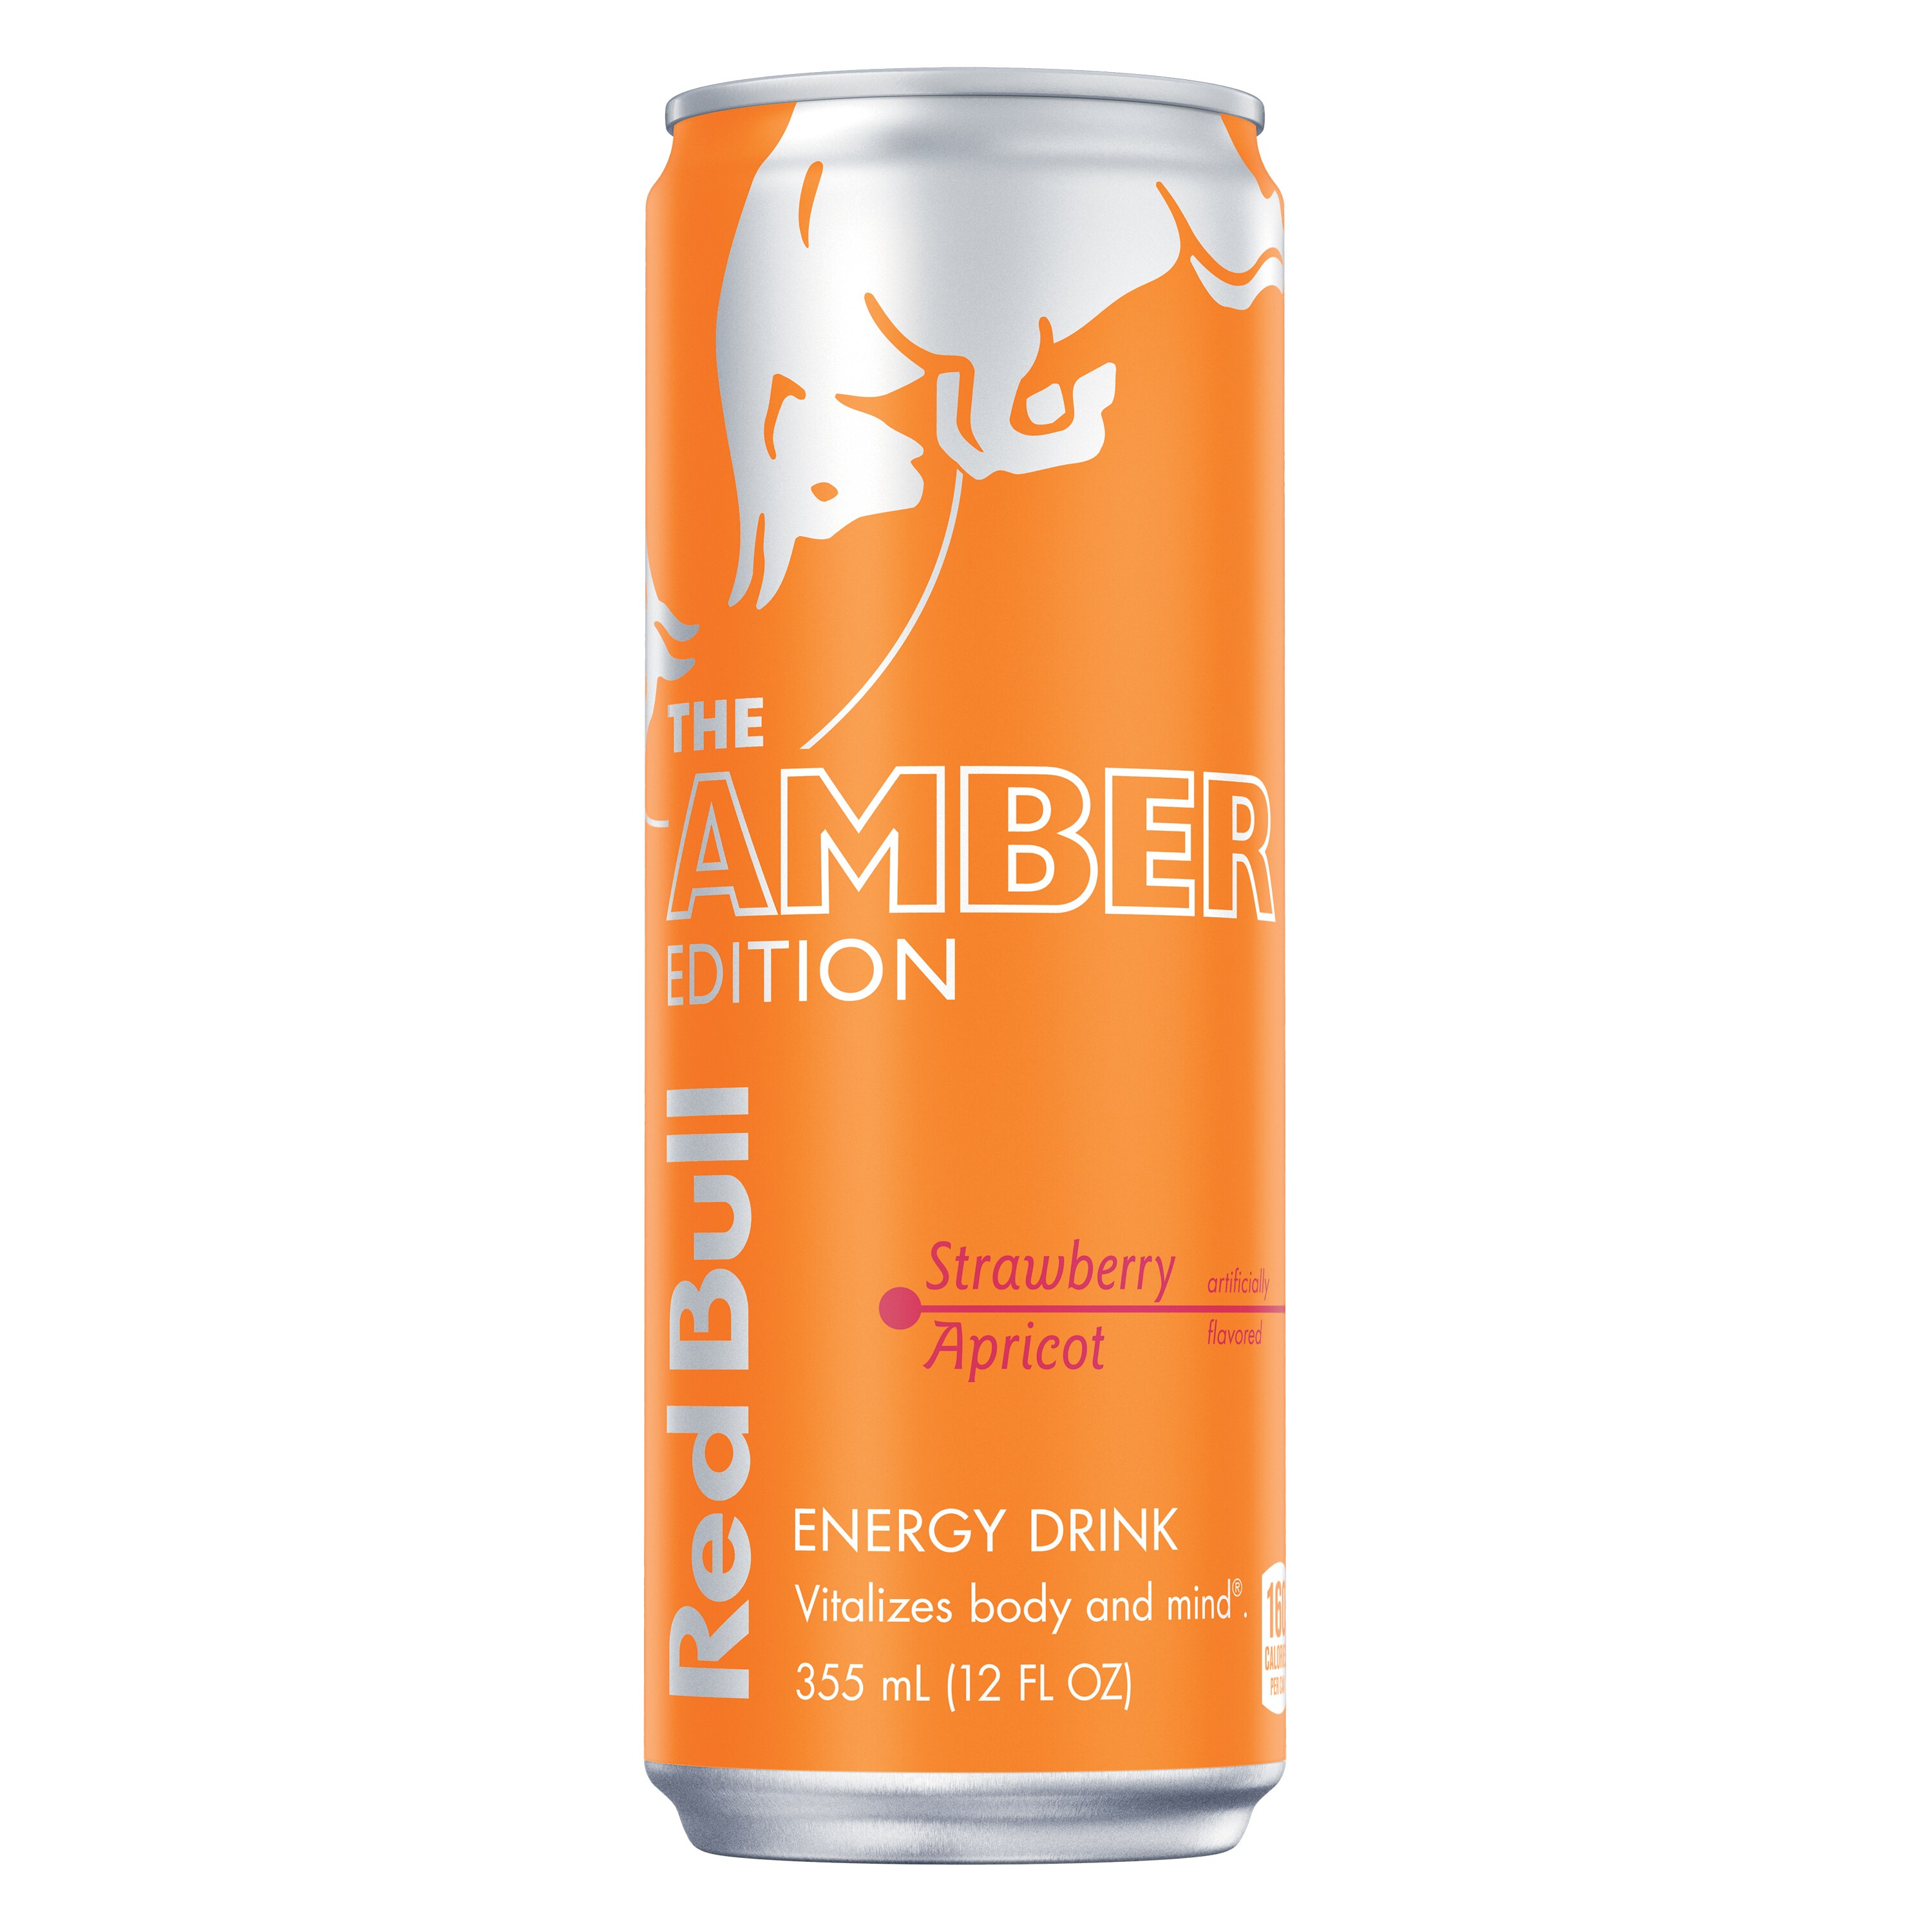 Red Bull Energy Drink, Amber Edition, 12 oz